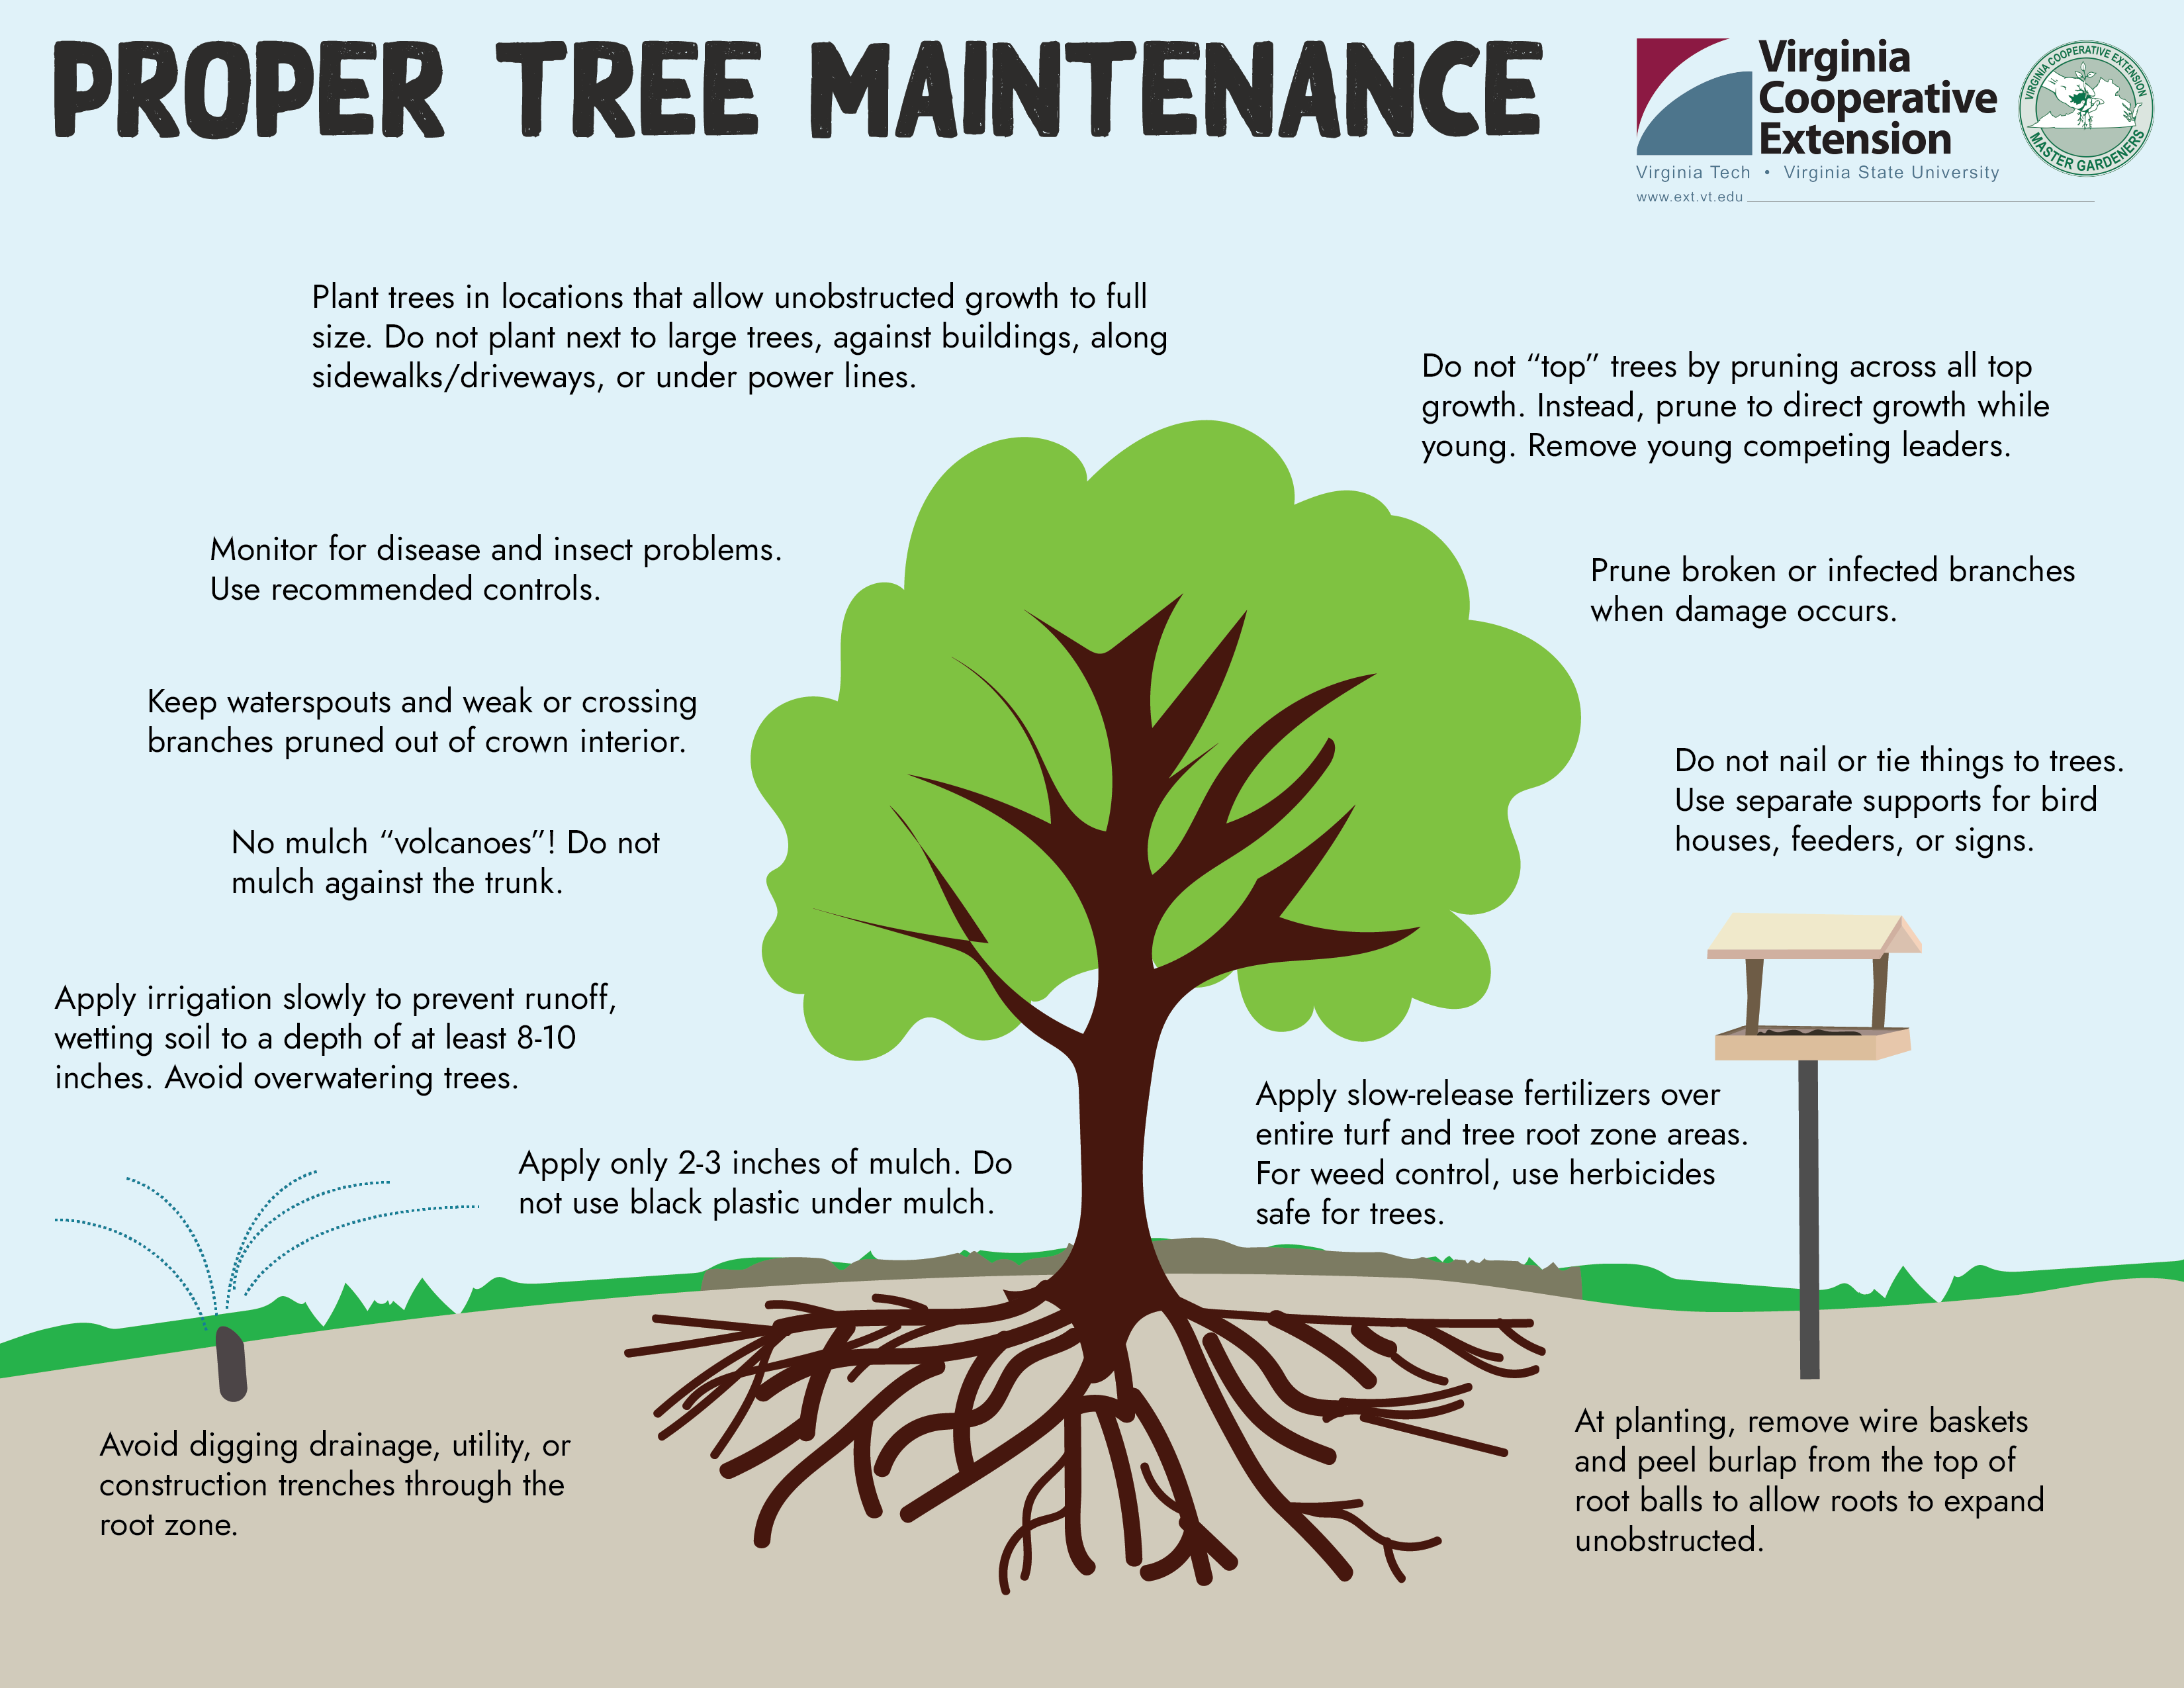 PROPER TREE MAINTENANCE CHART that suggests Planting trees in locations to allow full growth, monitoring for disease, keeping waterspouts pruned, no volcano mulch, applying irrigation slowly, allying only 2-3 inches of mulch, avoid digging drainage lines in the root zone, don't top trees, prune broken branches, don't nail to the tree, apply fertilizer over root zone, and at planting remove wire baskets.